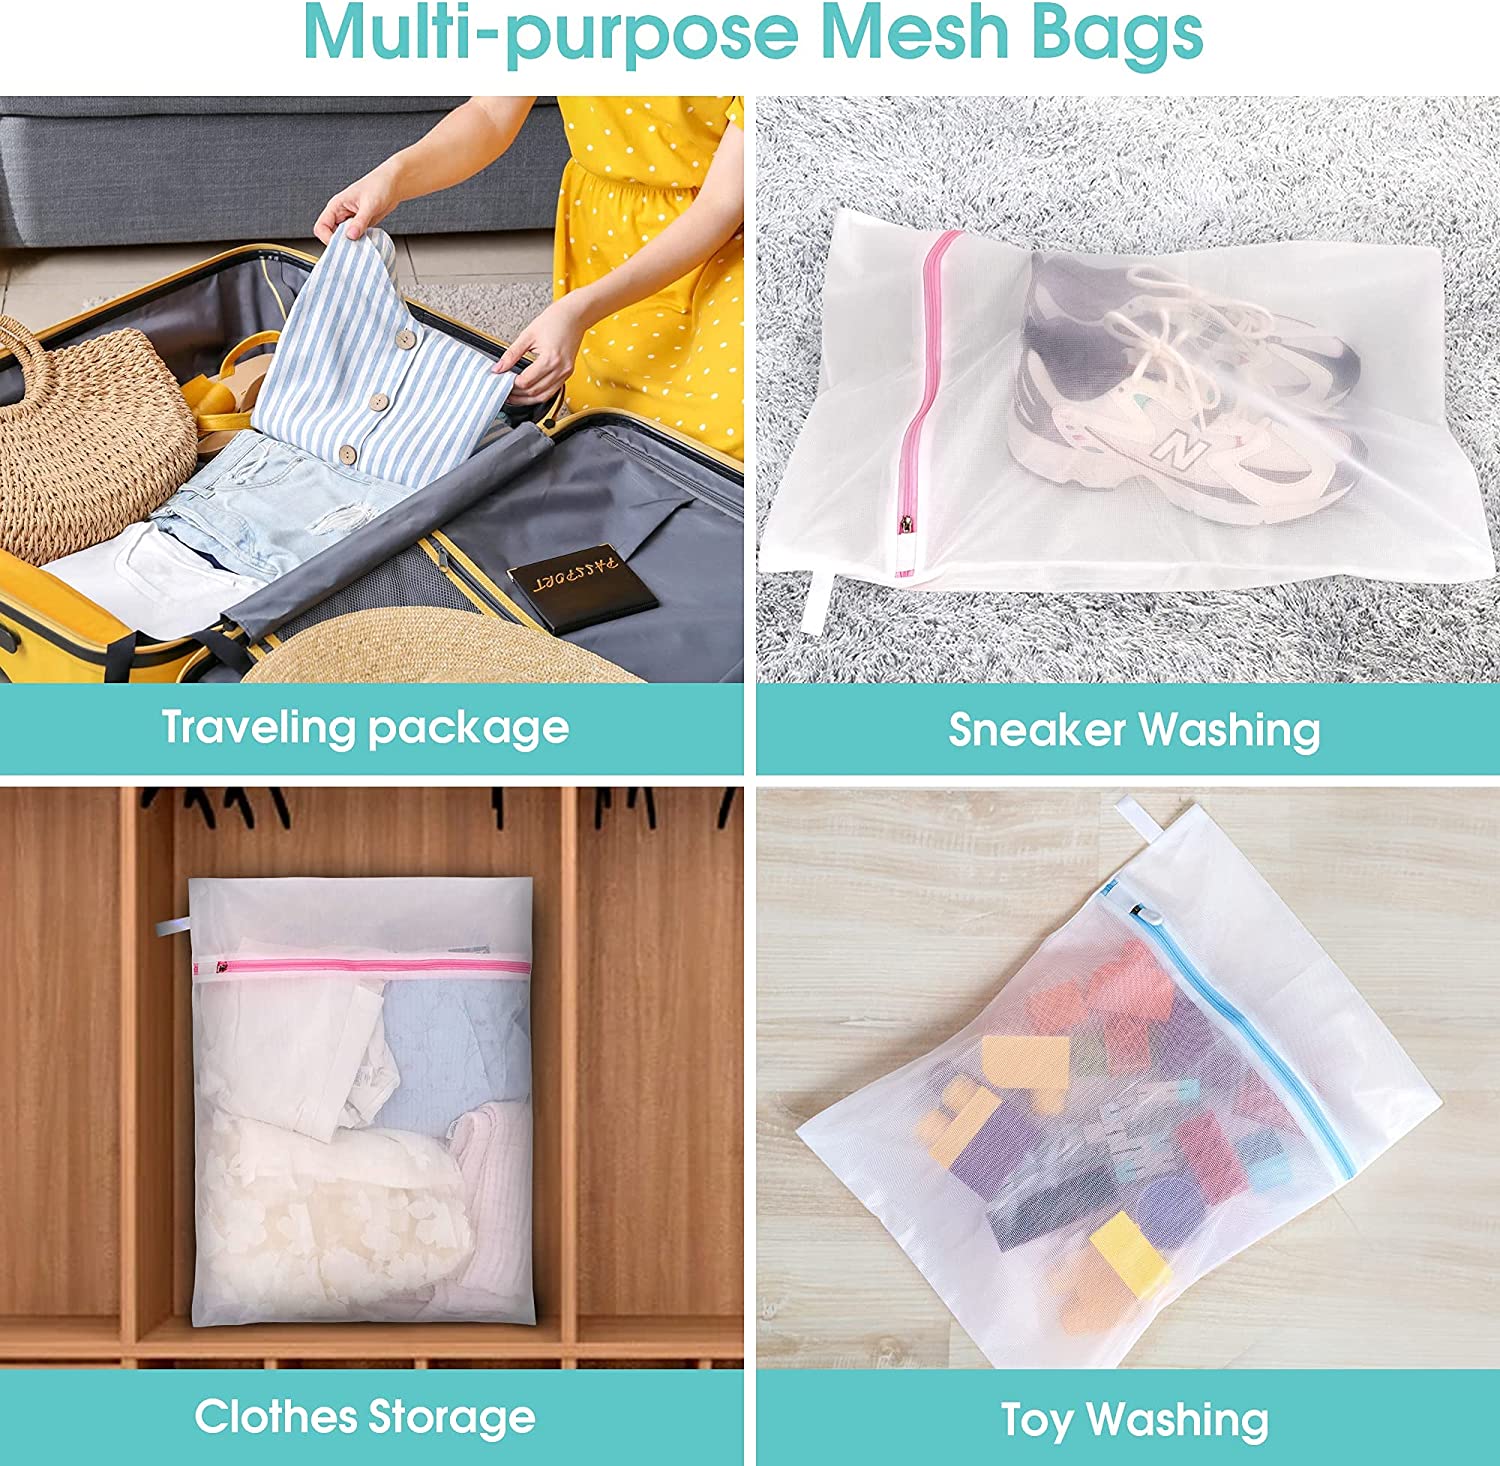 Final Clear Out! Mesh Laundry Bags with Lockable Drawstring, Machine  Washing Bags for Laundry,Bra,Lingerie,Blouse and Travel Storage